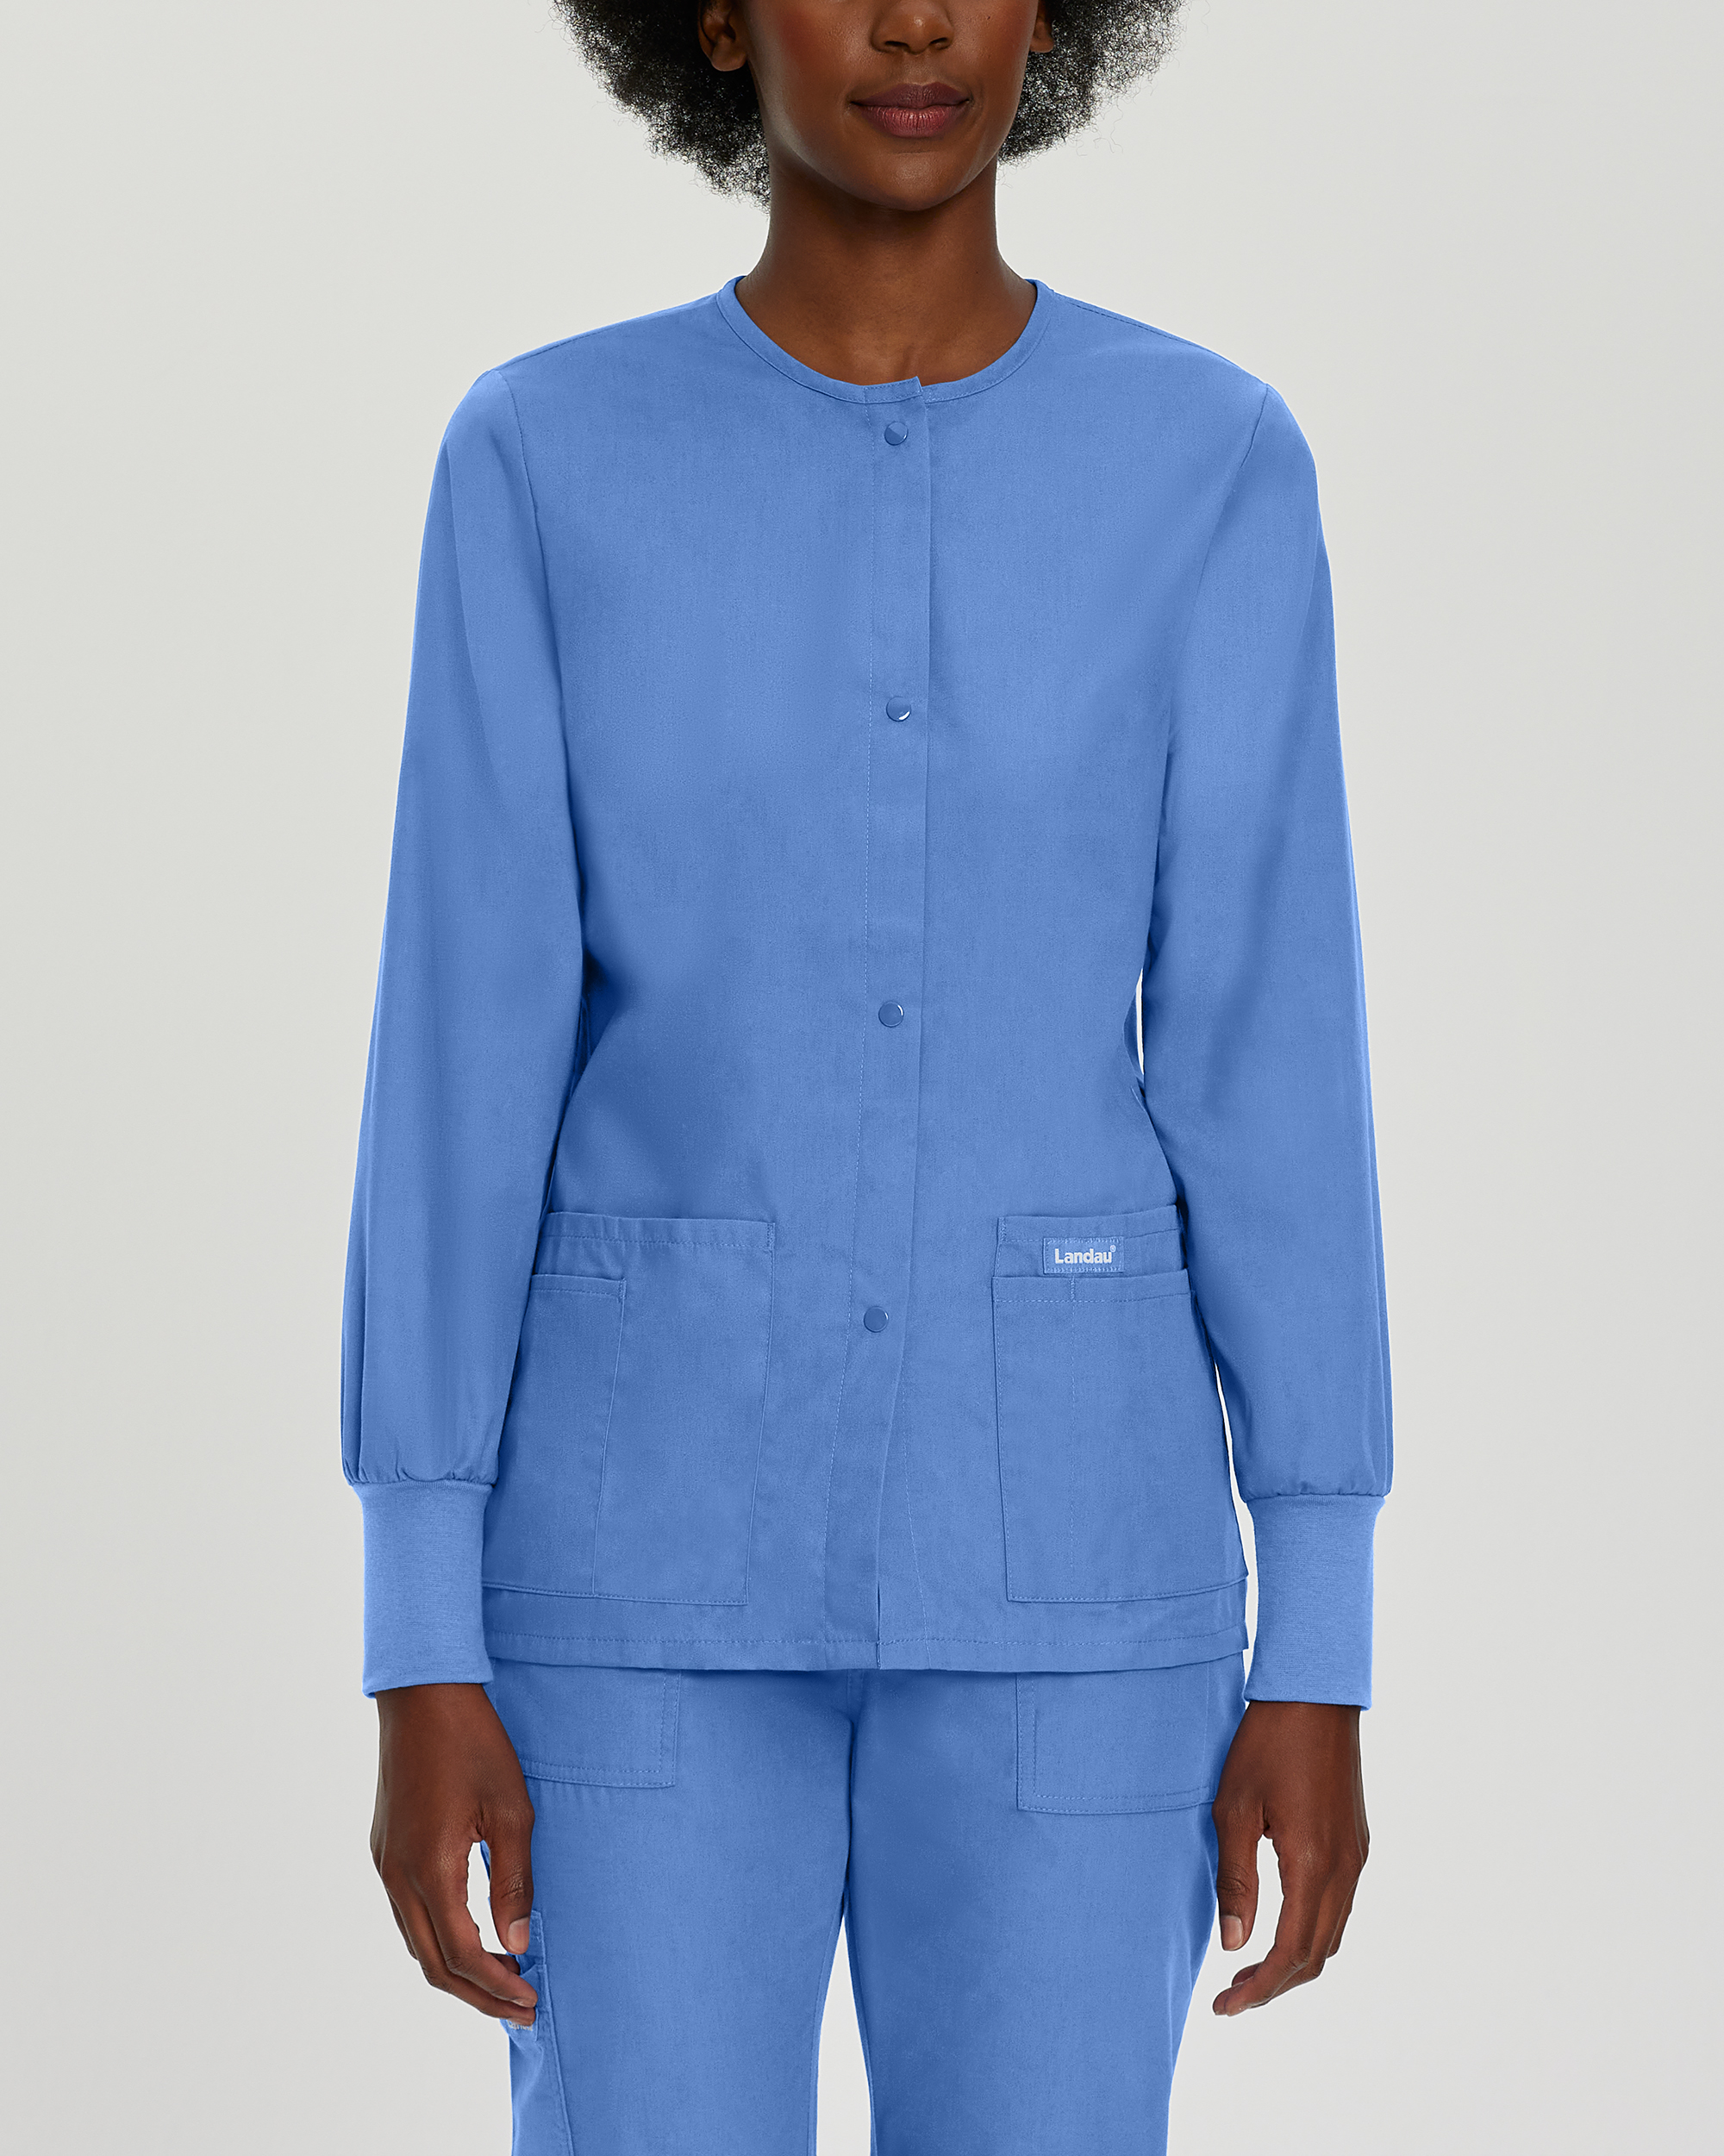 What material is the Women's Full-Length Scrub Jacket made of?